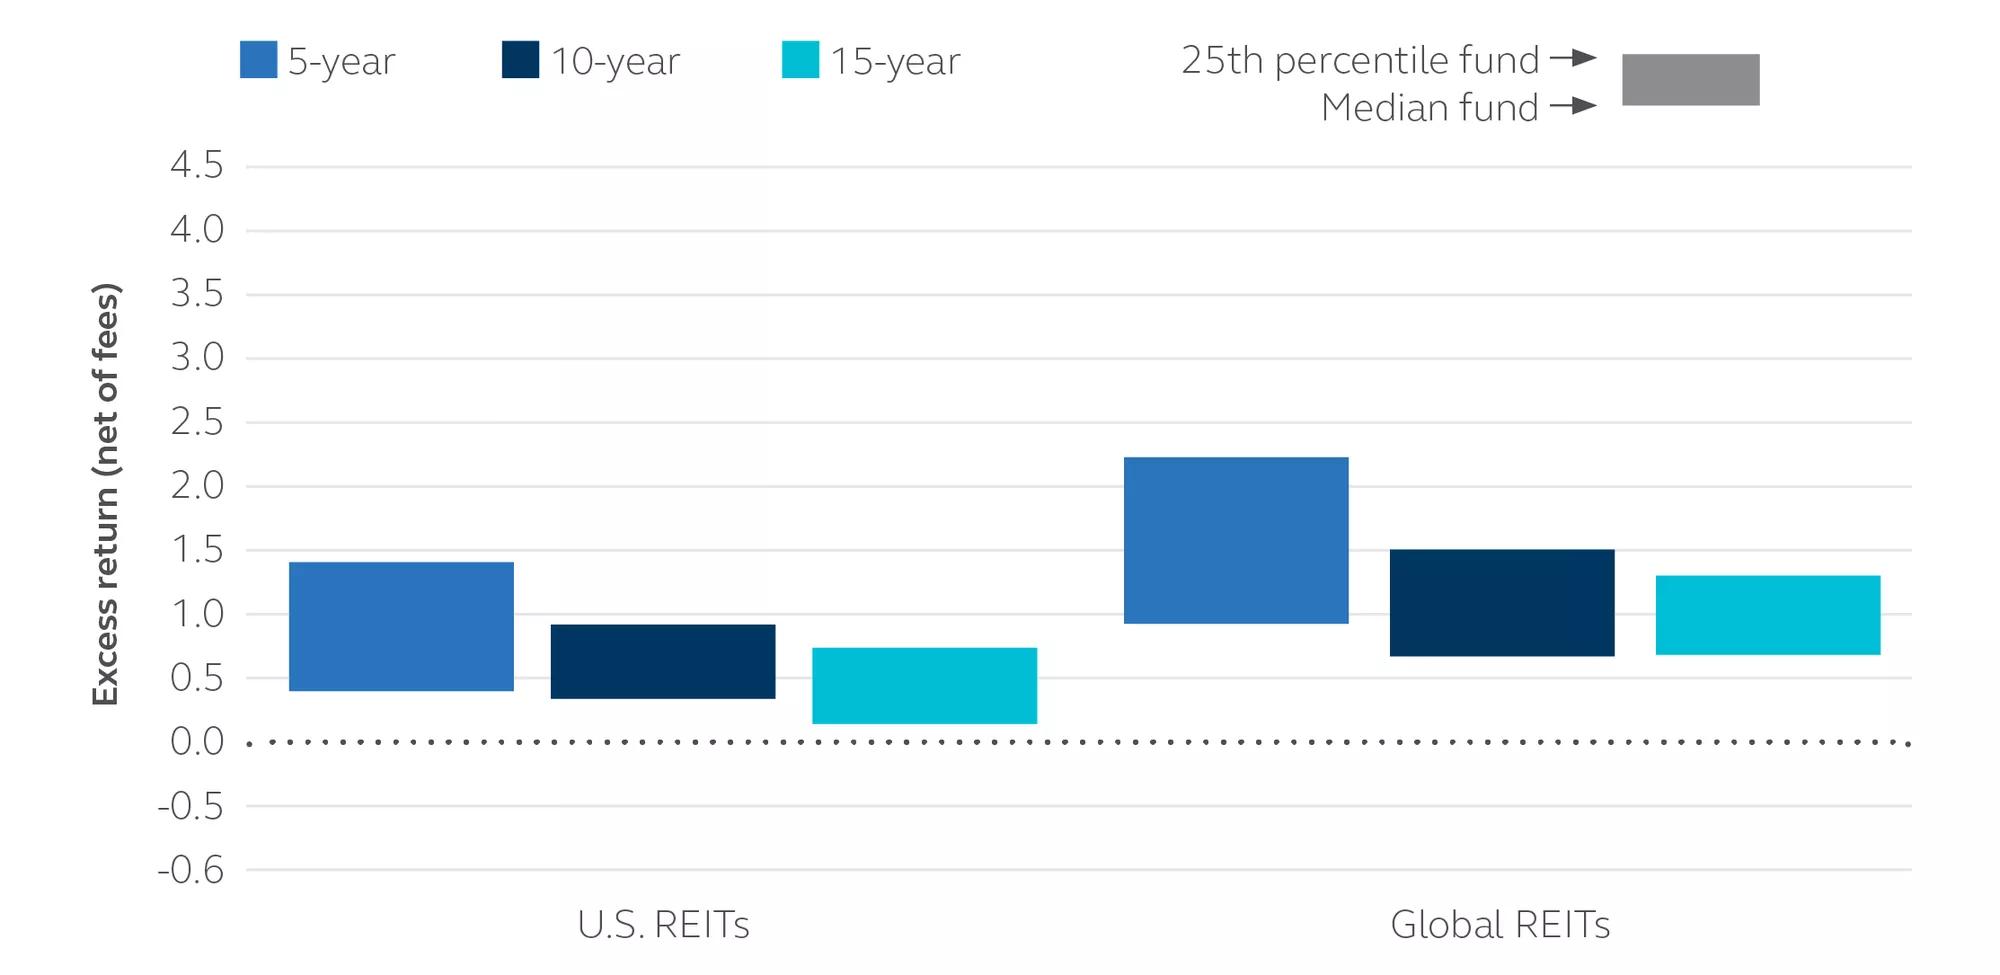 Bar chart showing excess returns of U.S. and global REITs over 5, 10, and 15 years.